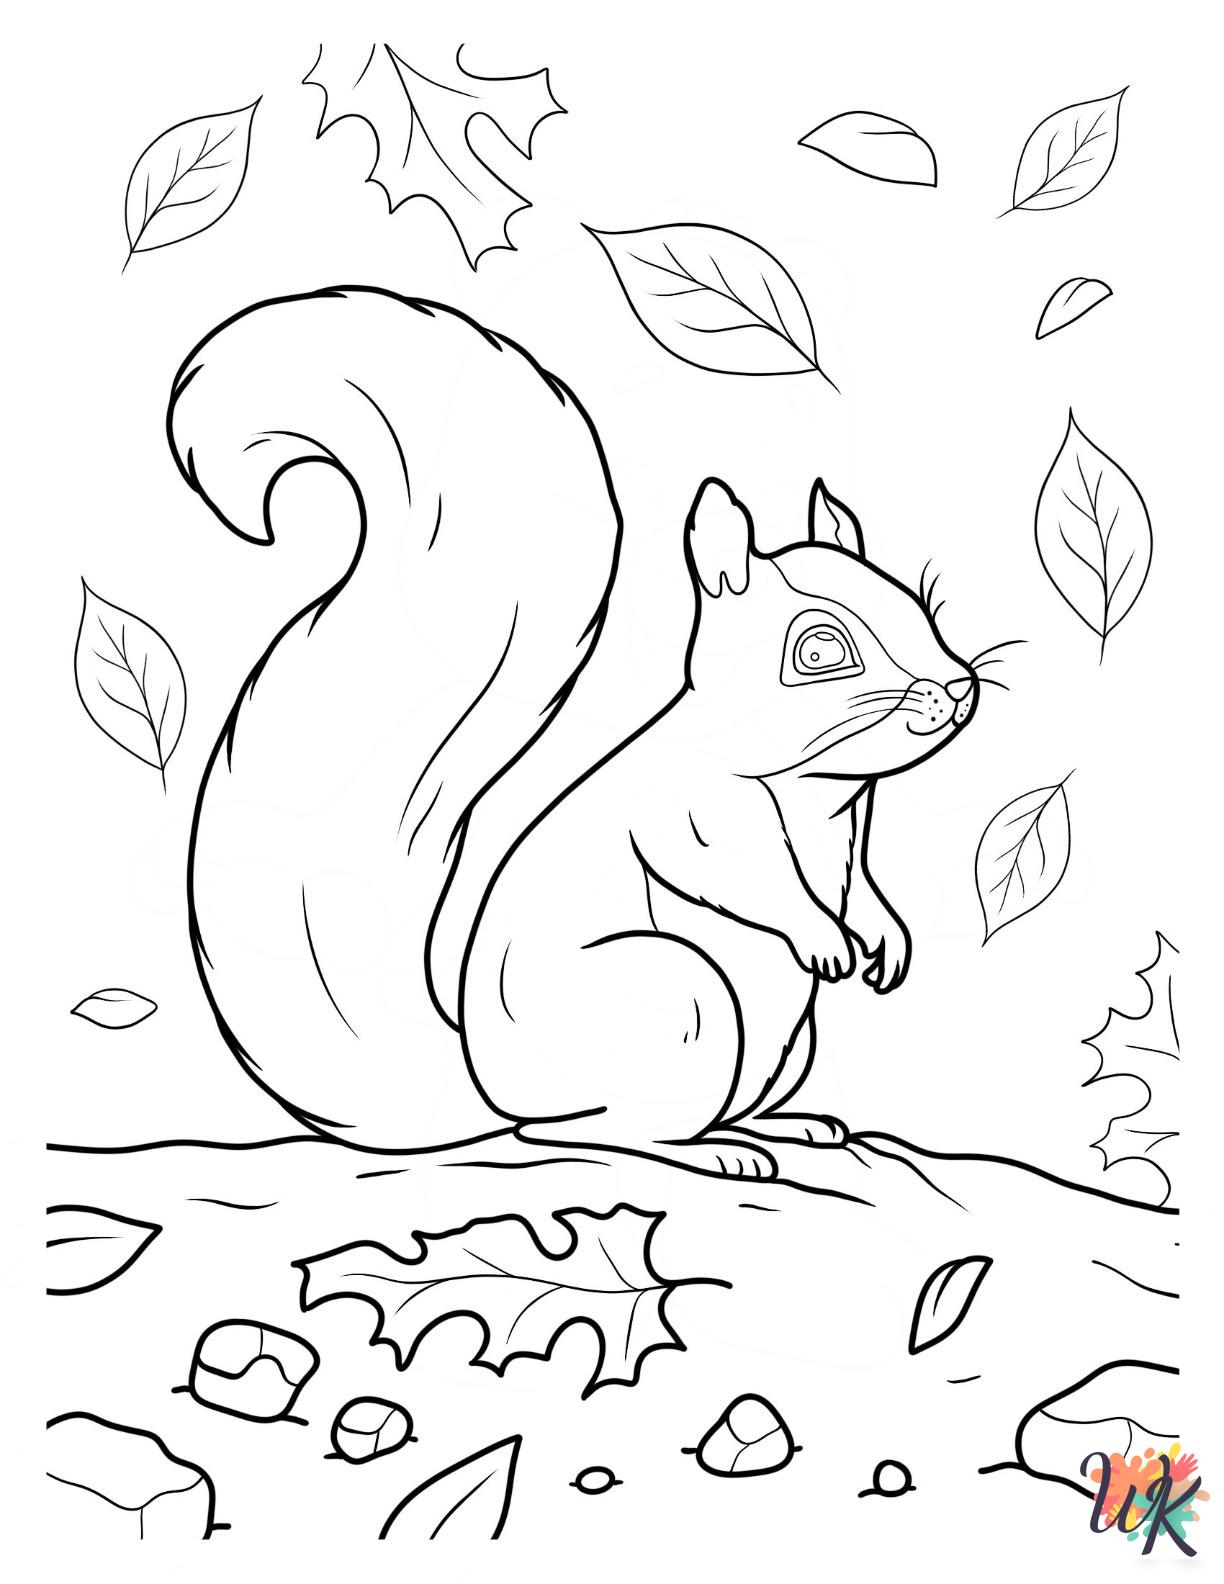 Squirrel coloring pages free printable